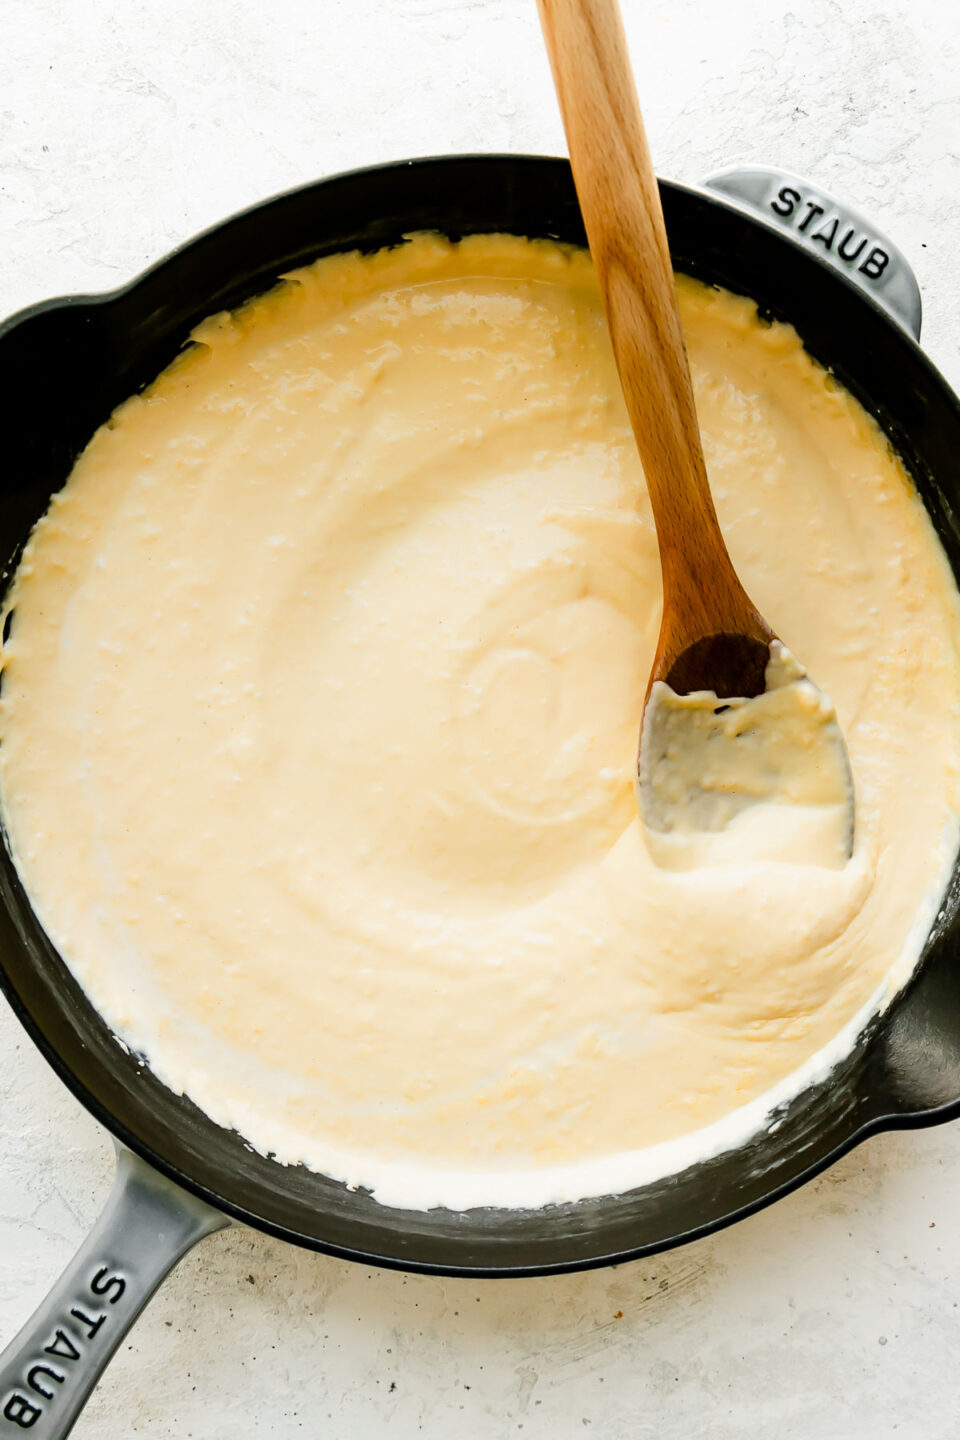 Homemade cheese sauce for cheesy ham and potato casserole fills a large gray Staub cast iron skillet that sits atop a creamy white textured surface. A wooden spoon rests inside of the skillet for stirring.